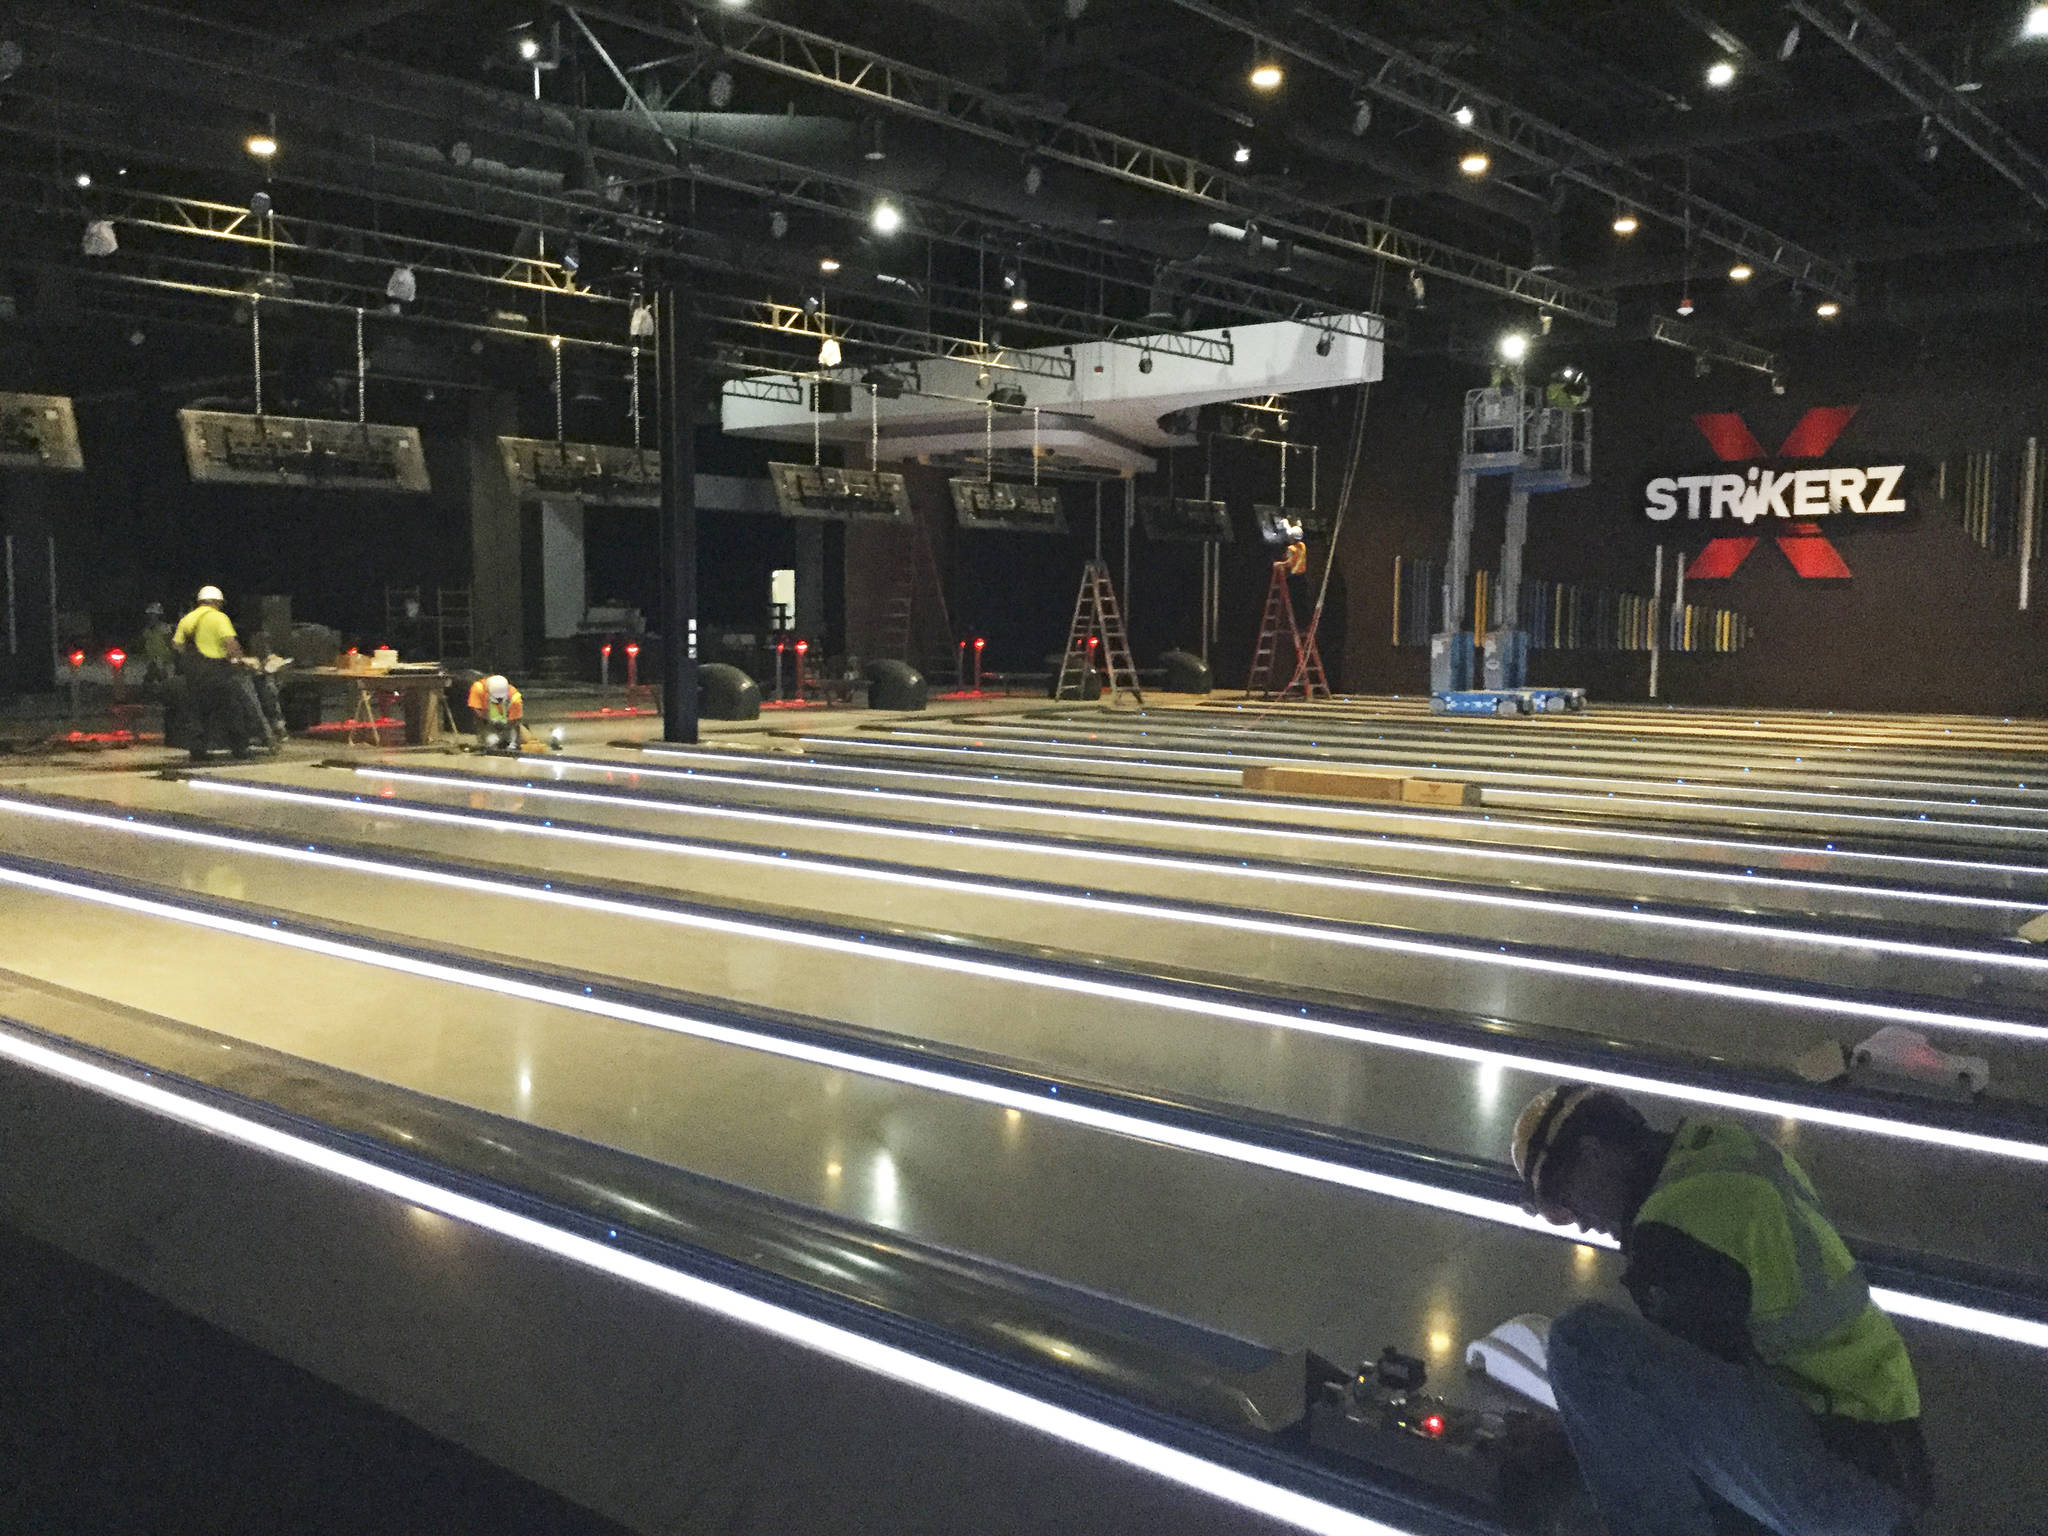 Strikerz bowling alley will open mid-August in Angel of the Winds Casino as part of a $60 million resort expansion. The soon-to-be-completed Rivers Run Events Center will occupy the dark area in the photo, connected with the alley.